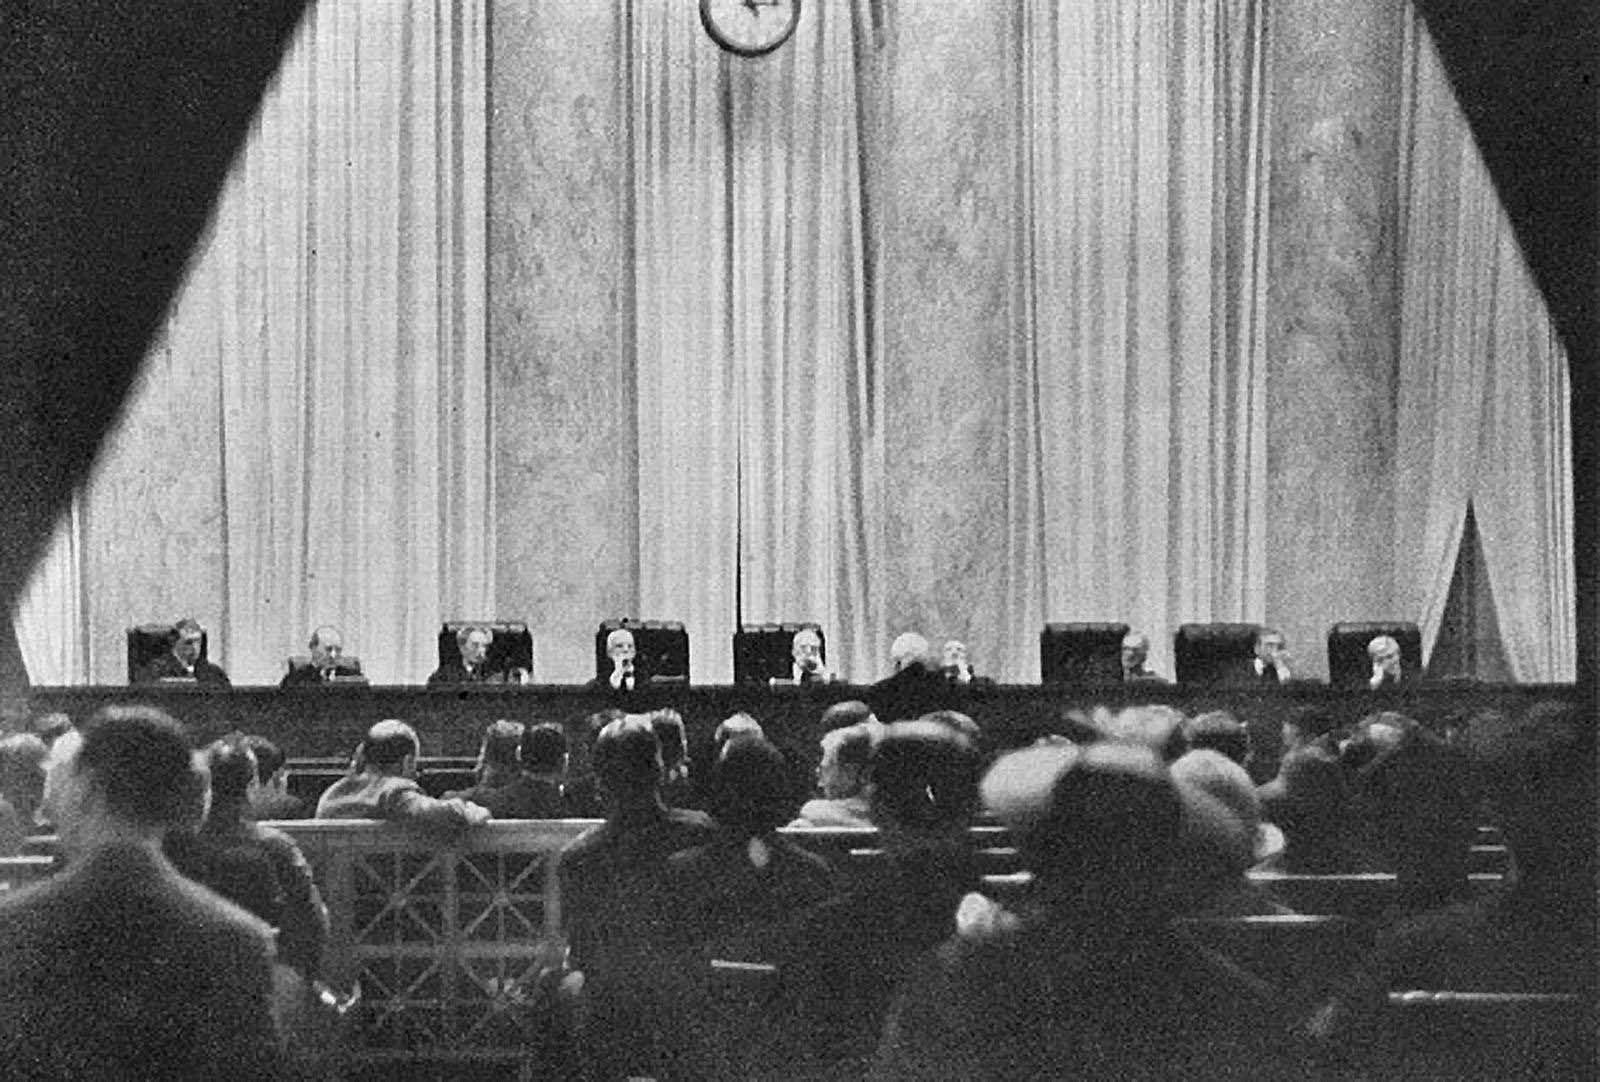 This other known photo of the Supreme Court in session. The photo was published in Time magazine on June 7, 1937.